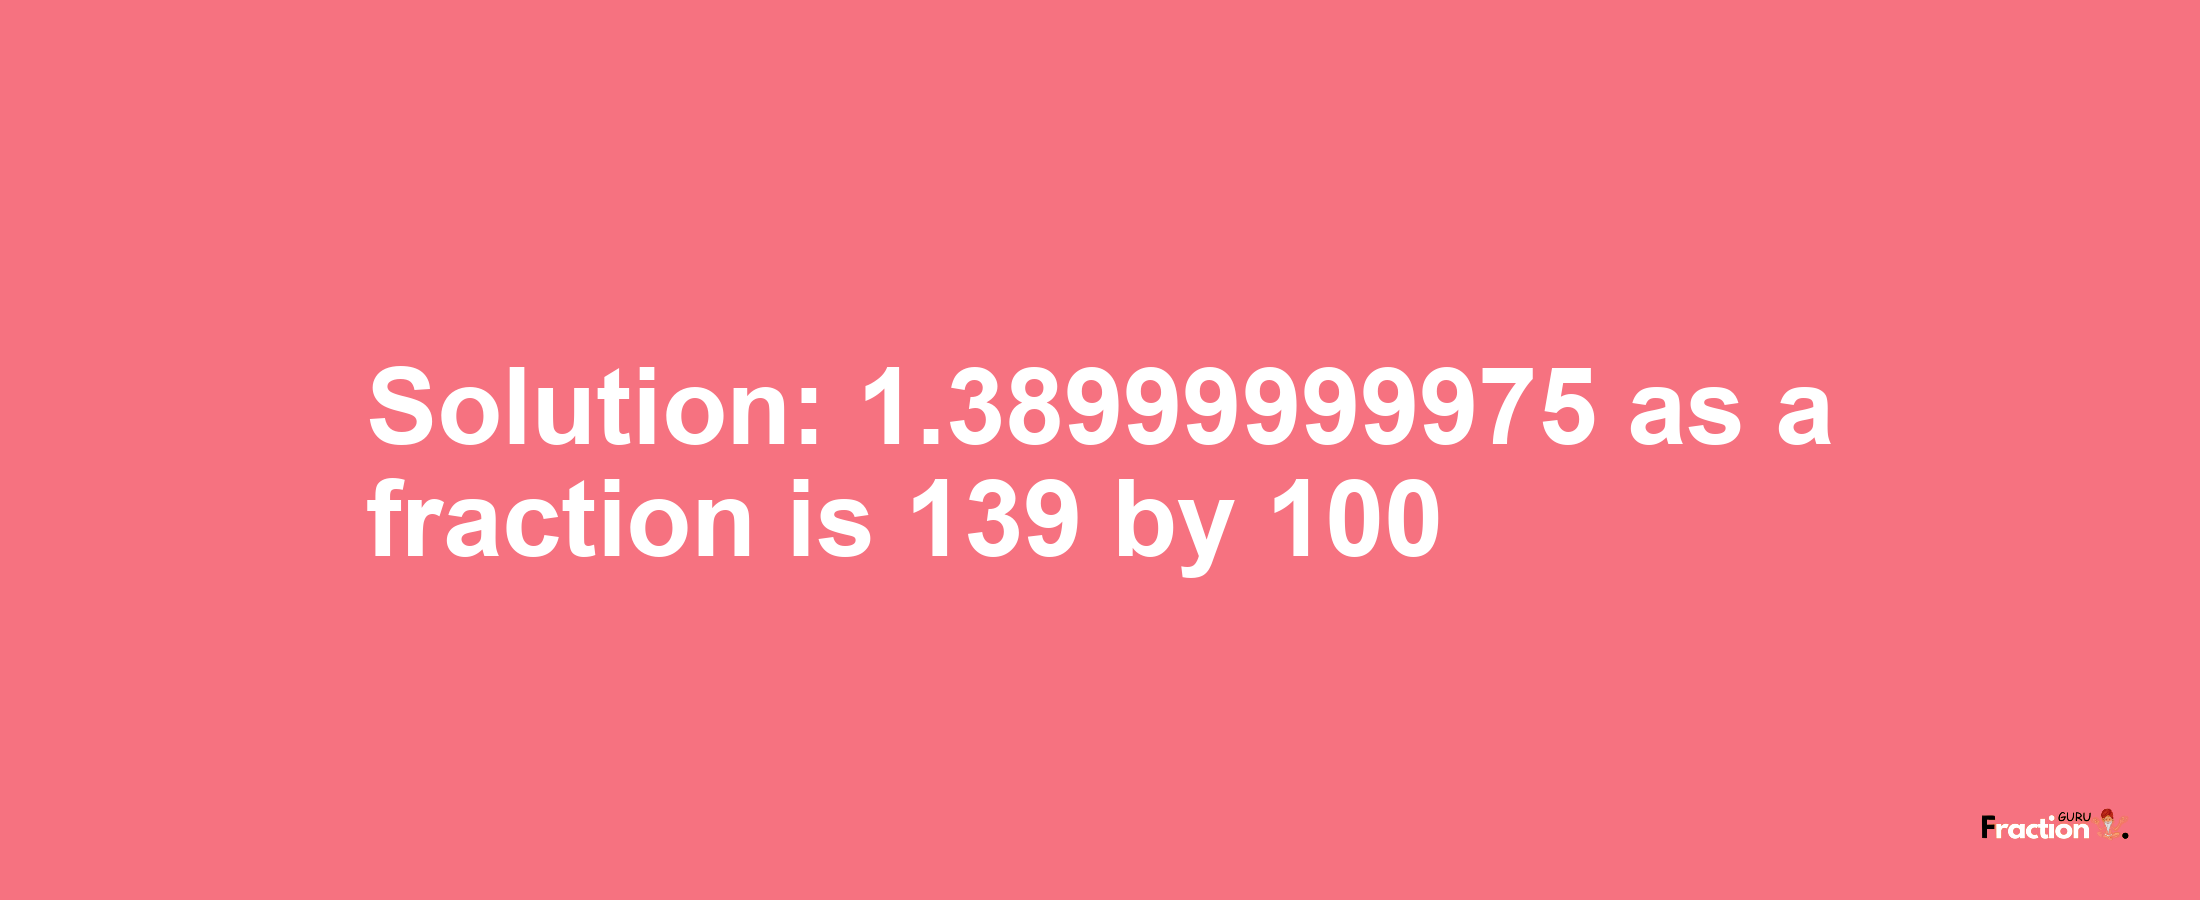 Solution:1.38999999975 as a fraction is 139/100